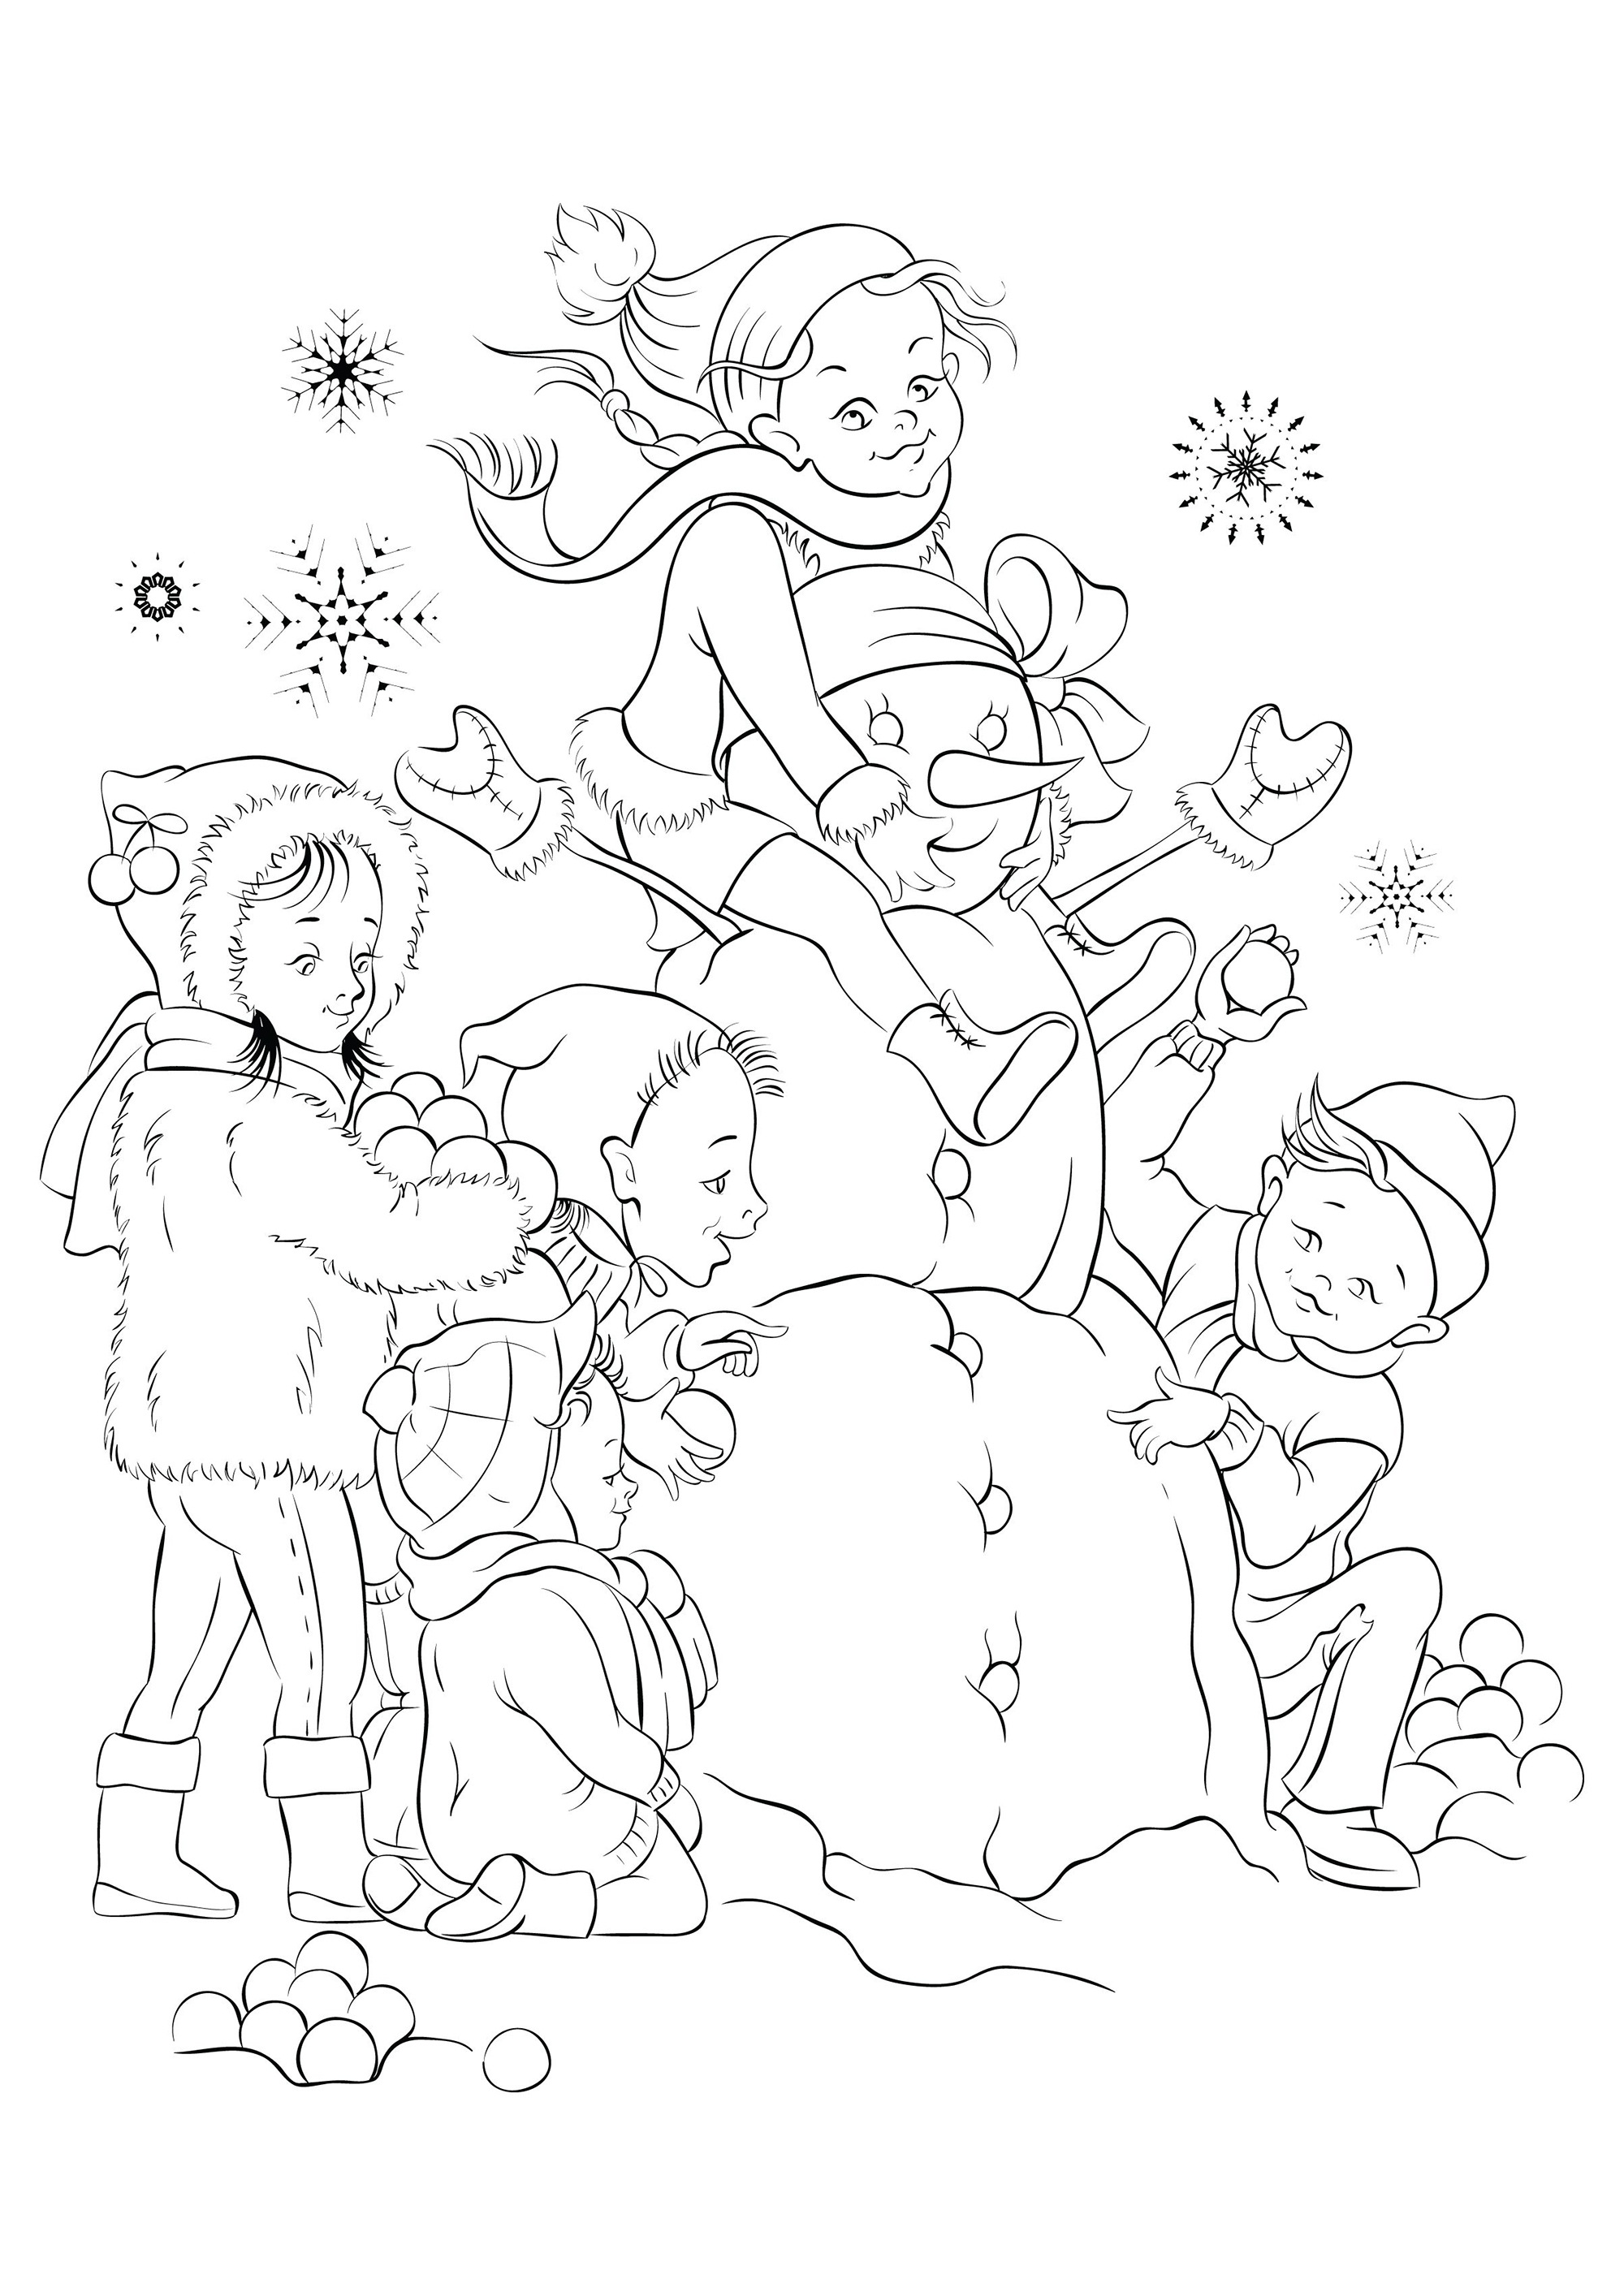 Children and the snowman they made together with fresh snow, Source : 123rf   Artist : regina555